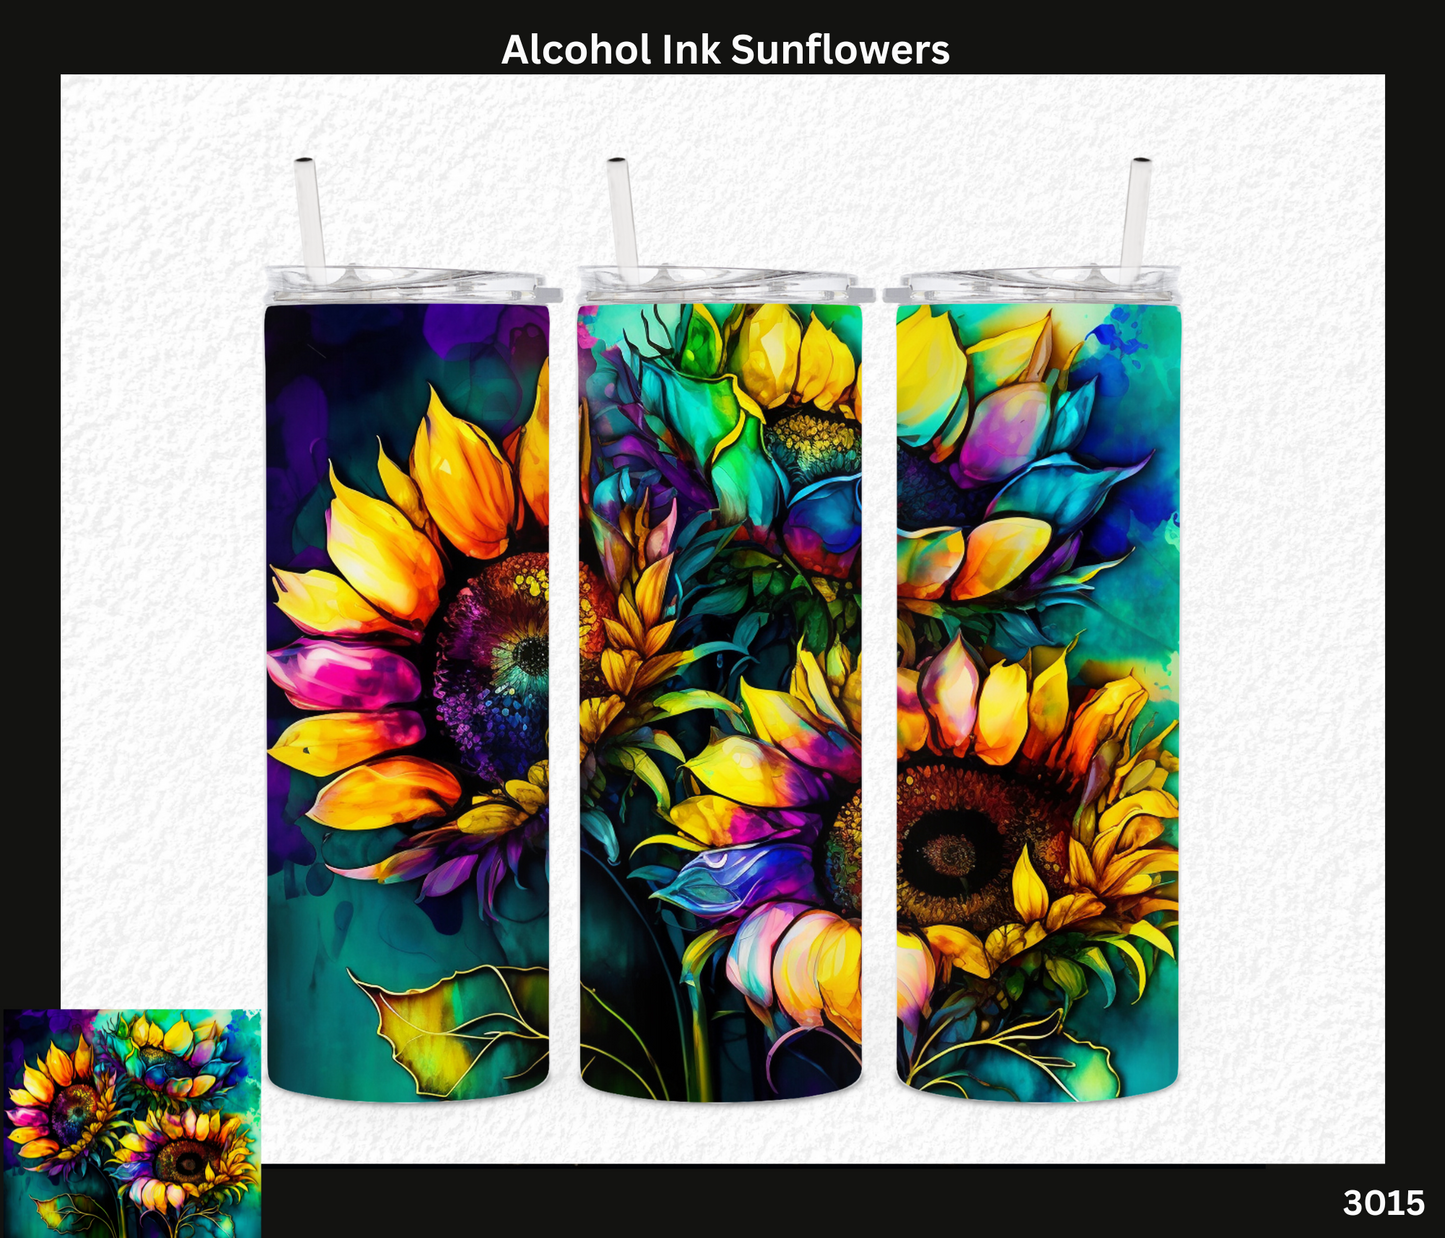 Alcohol Ink Sunflowers